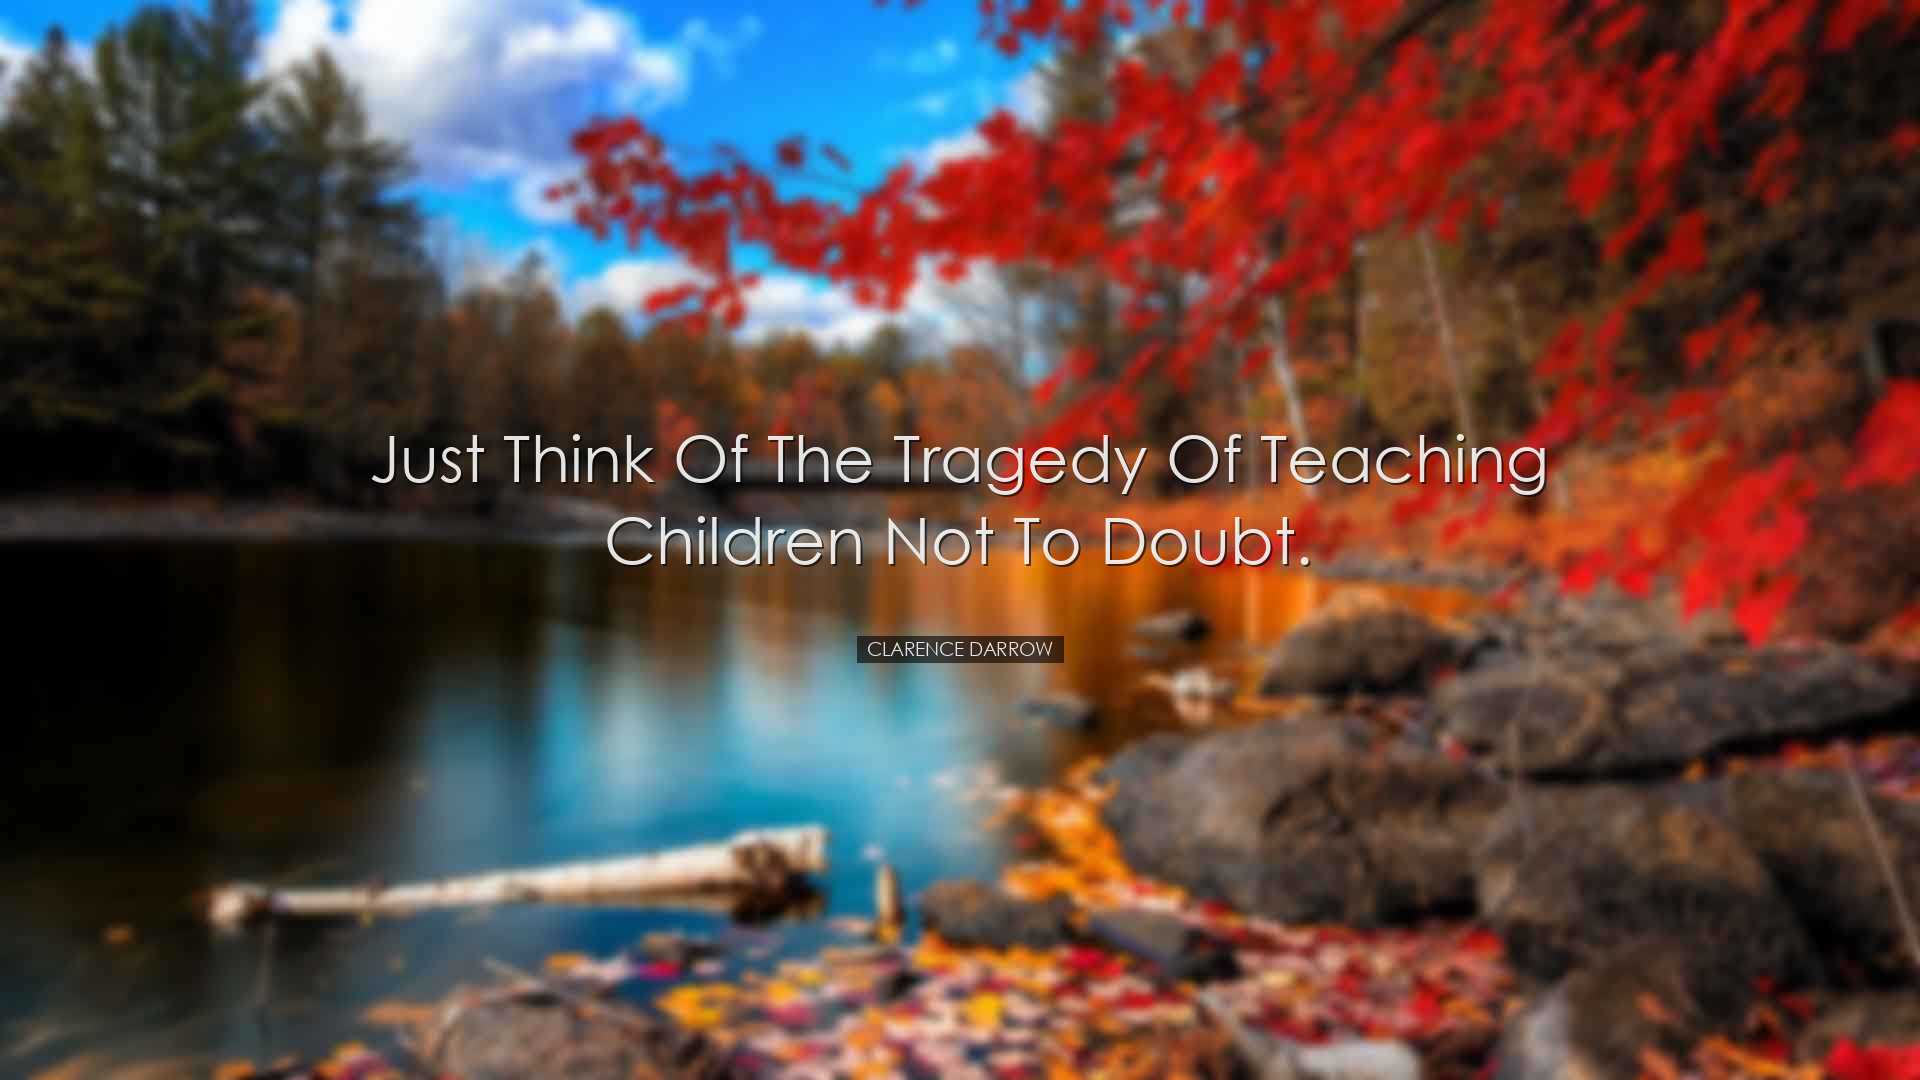 Just think of the tragedy of teaching children not to doubt. - Cla